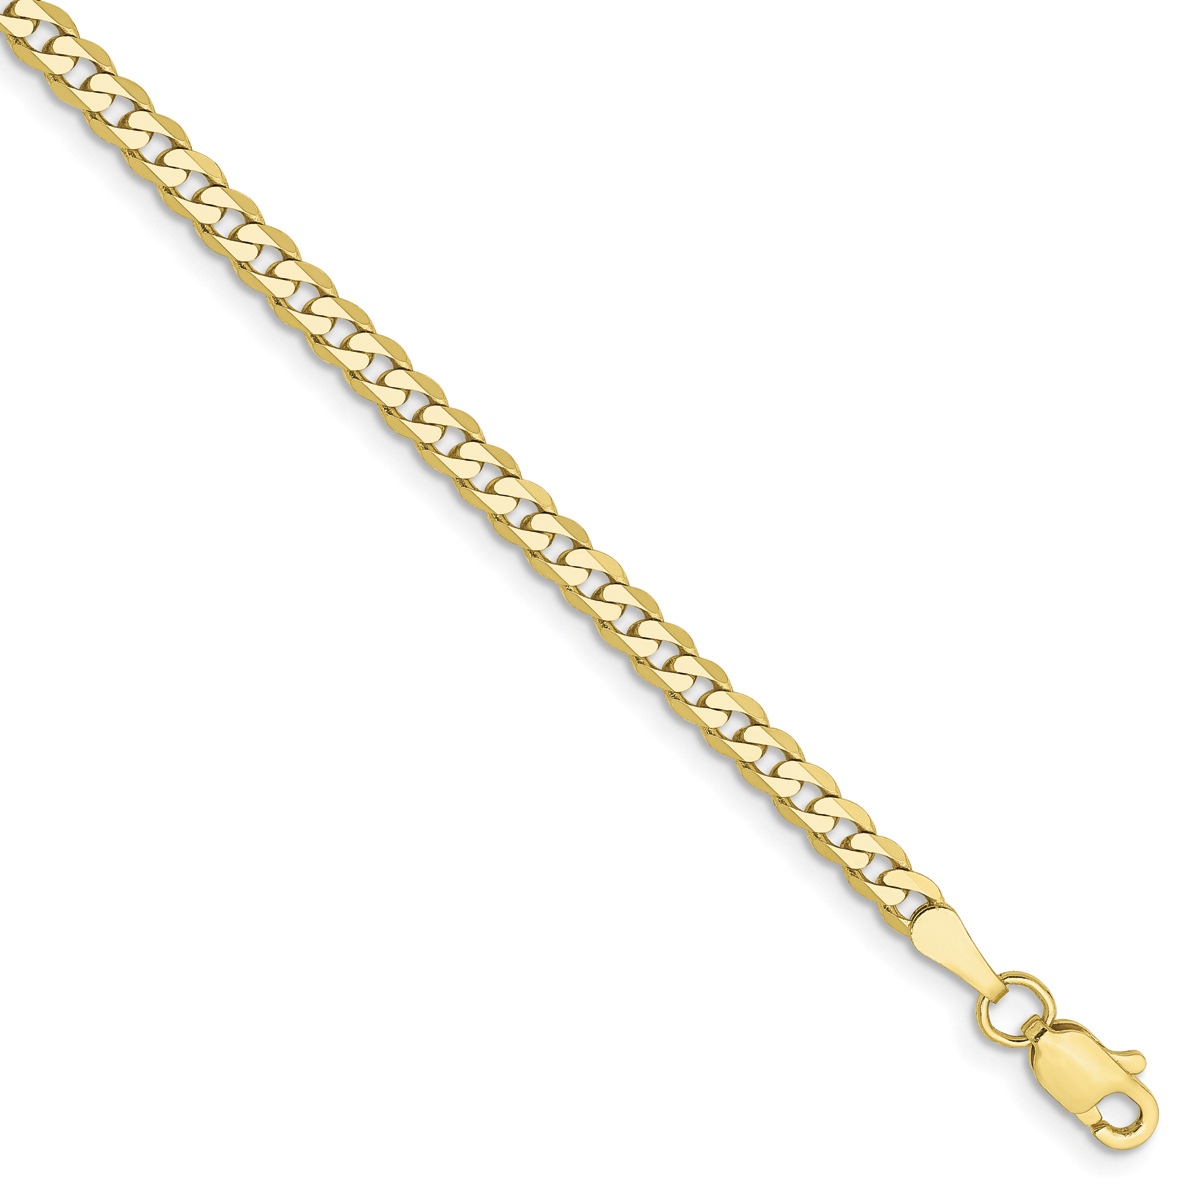 Unisex Gold Classics(tm) 10kt. 2.9mm 16in. Beveled Chain Necklace